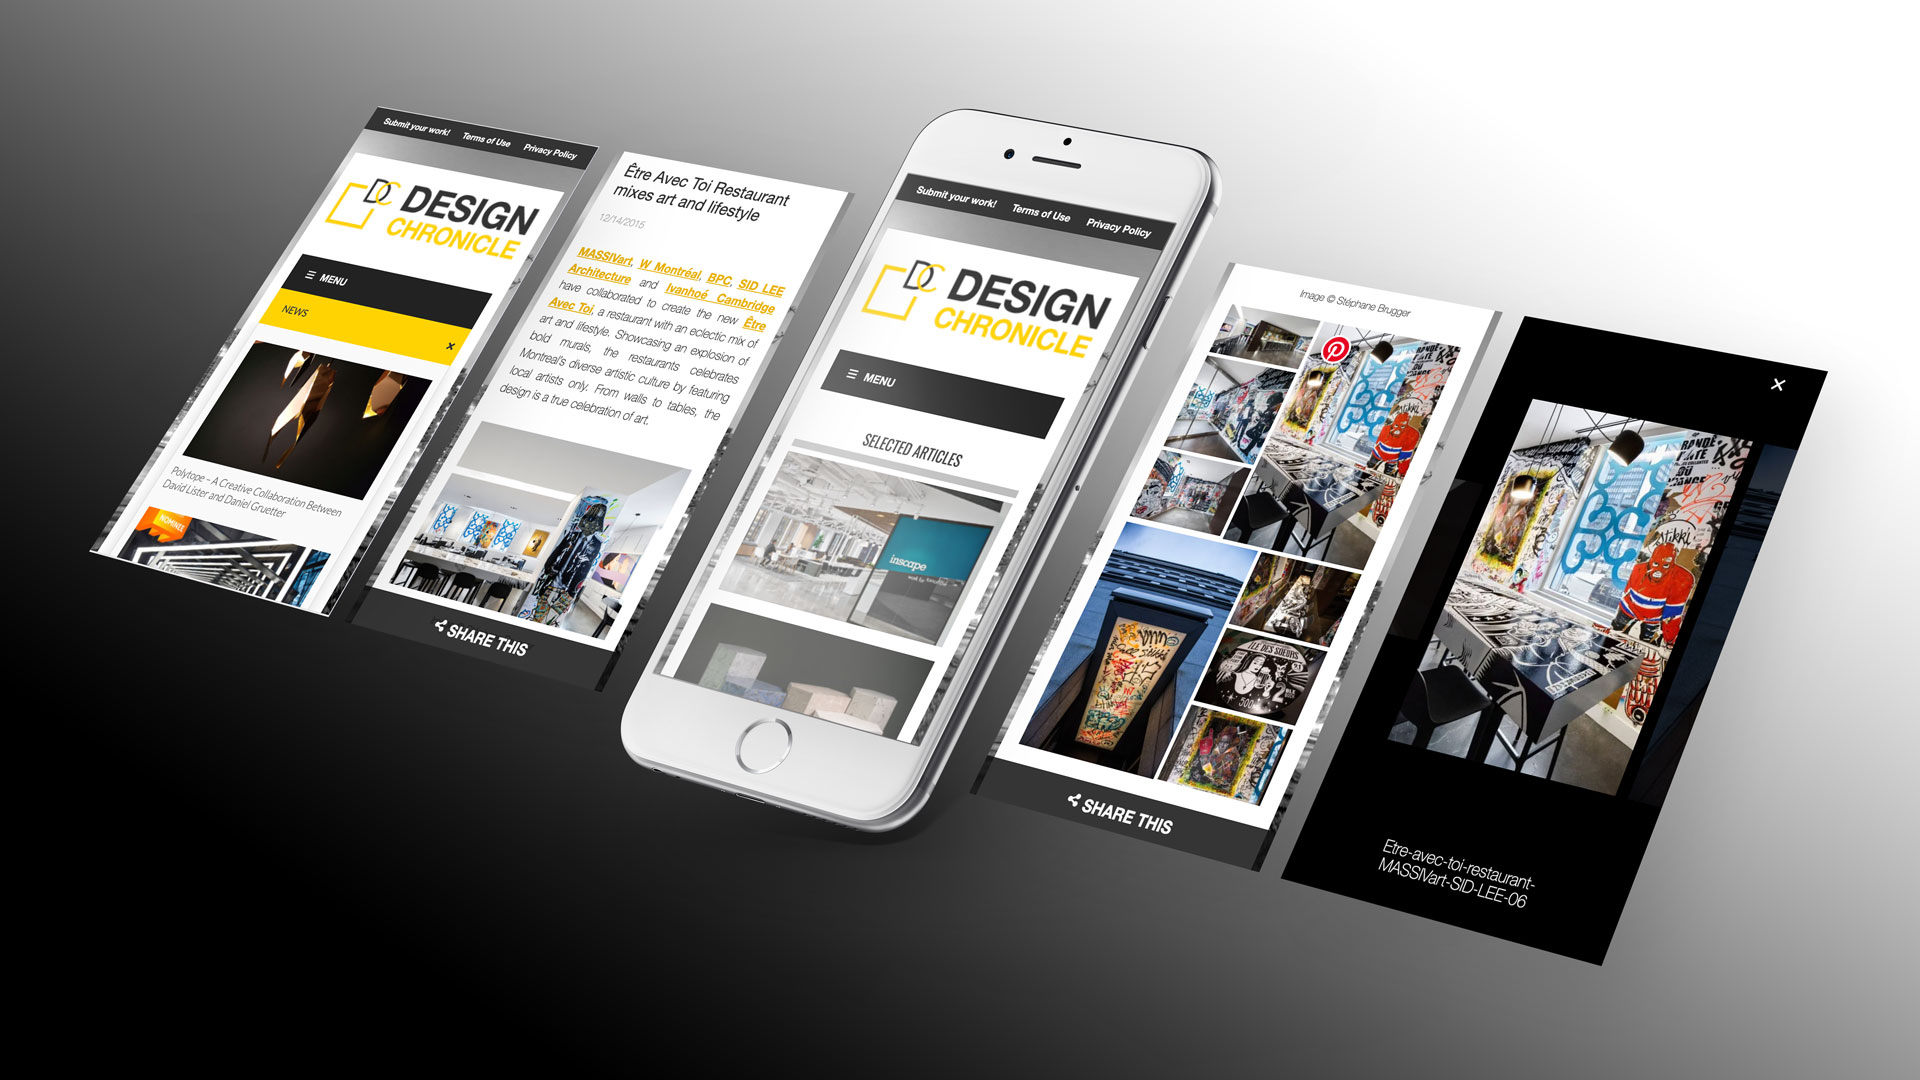 This image by PixelUp highlights the custom website design created for Design Chronicle, with a particular focus on its mobile compatibility. Depicted are five isometric iPhone screens showcasing various pages, providing a glimpse into the aesthetics and functionality of the mobile interface. This project is among those undertaken by PixelUp.